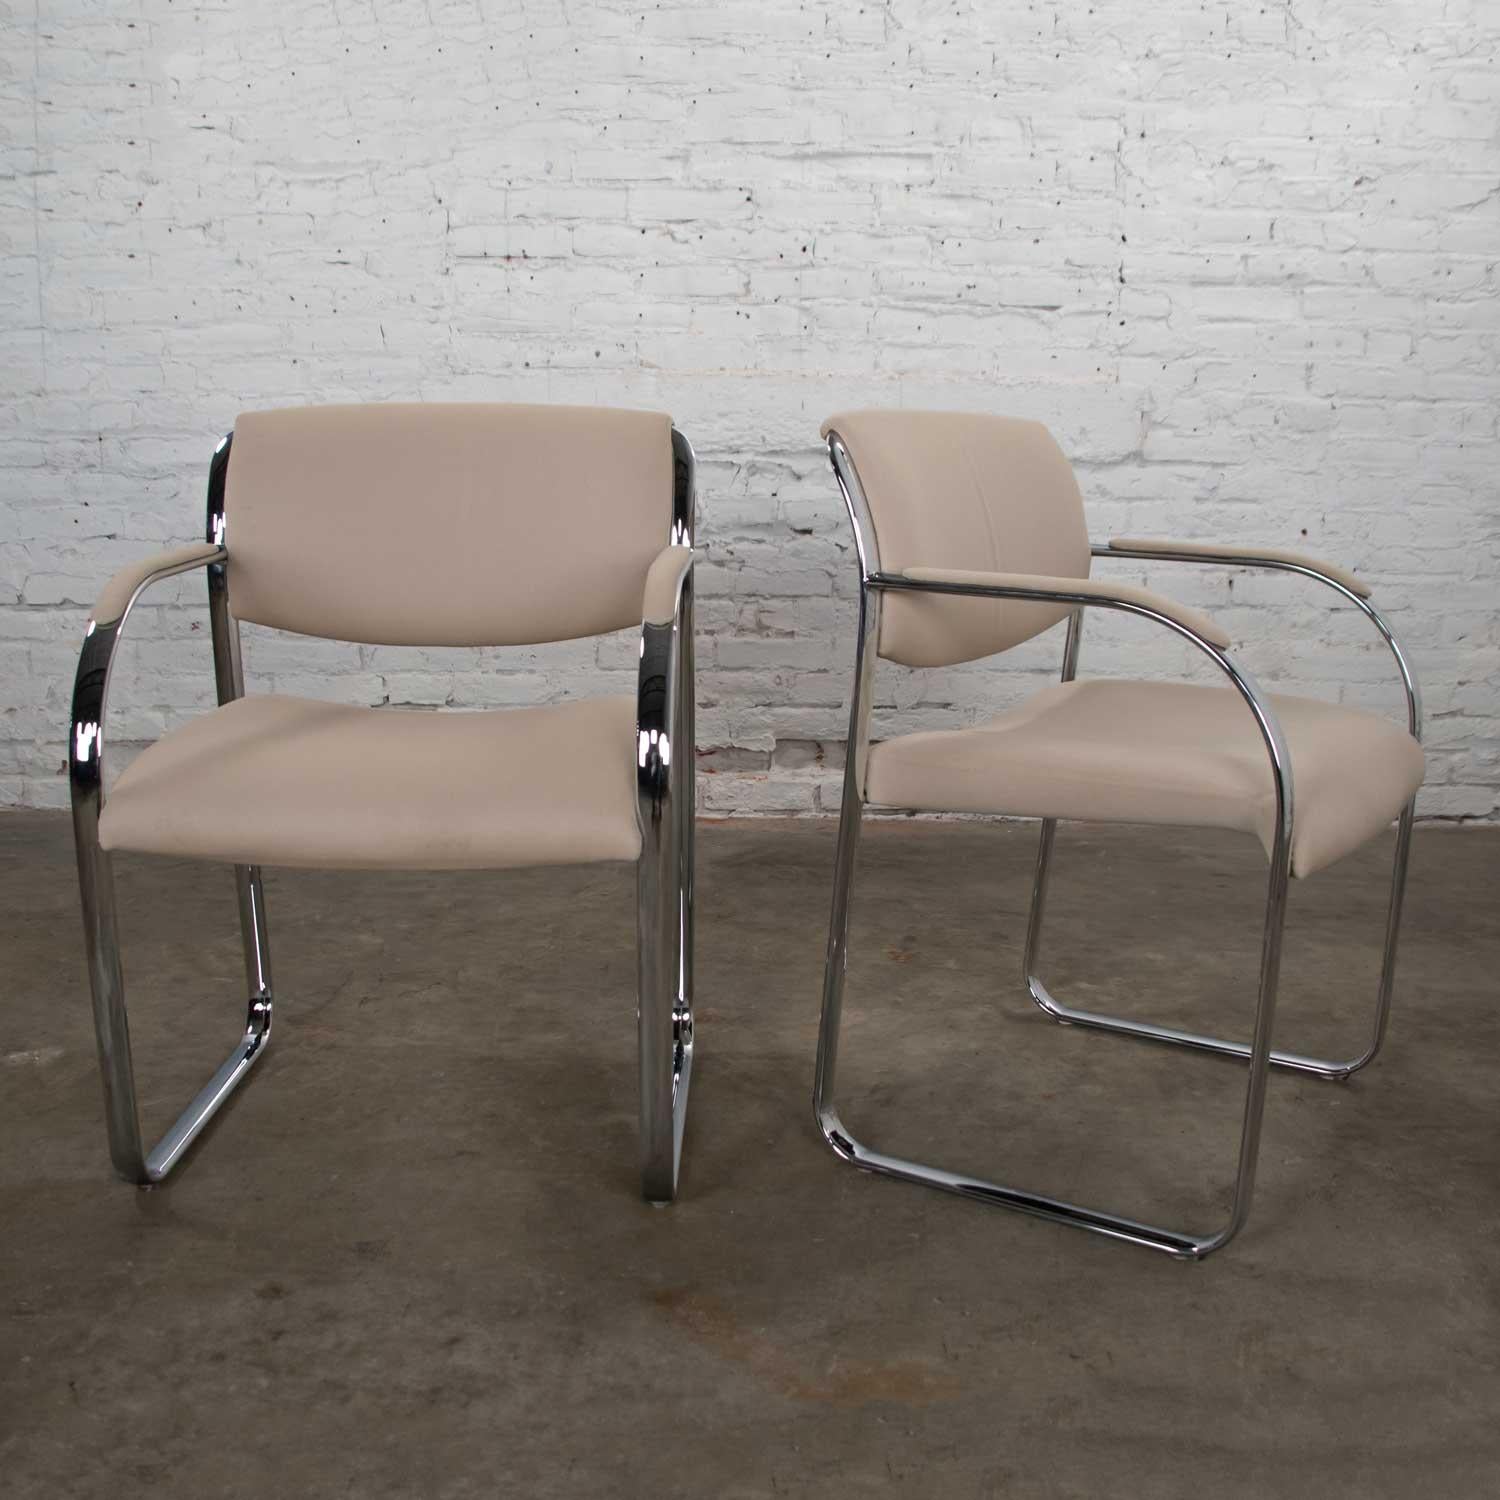 Modern Pair Off-White and Chrome Accent or Dining Armchairs by Steelcase In Good Condition For Sale In Topeka, KS